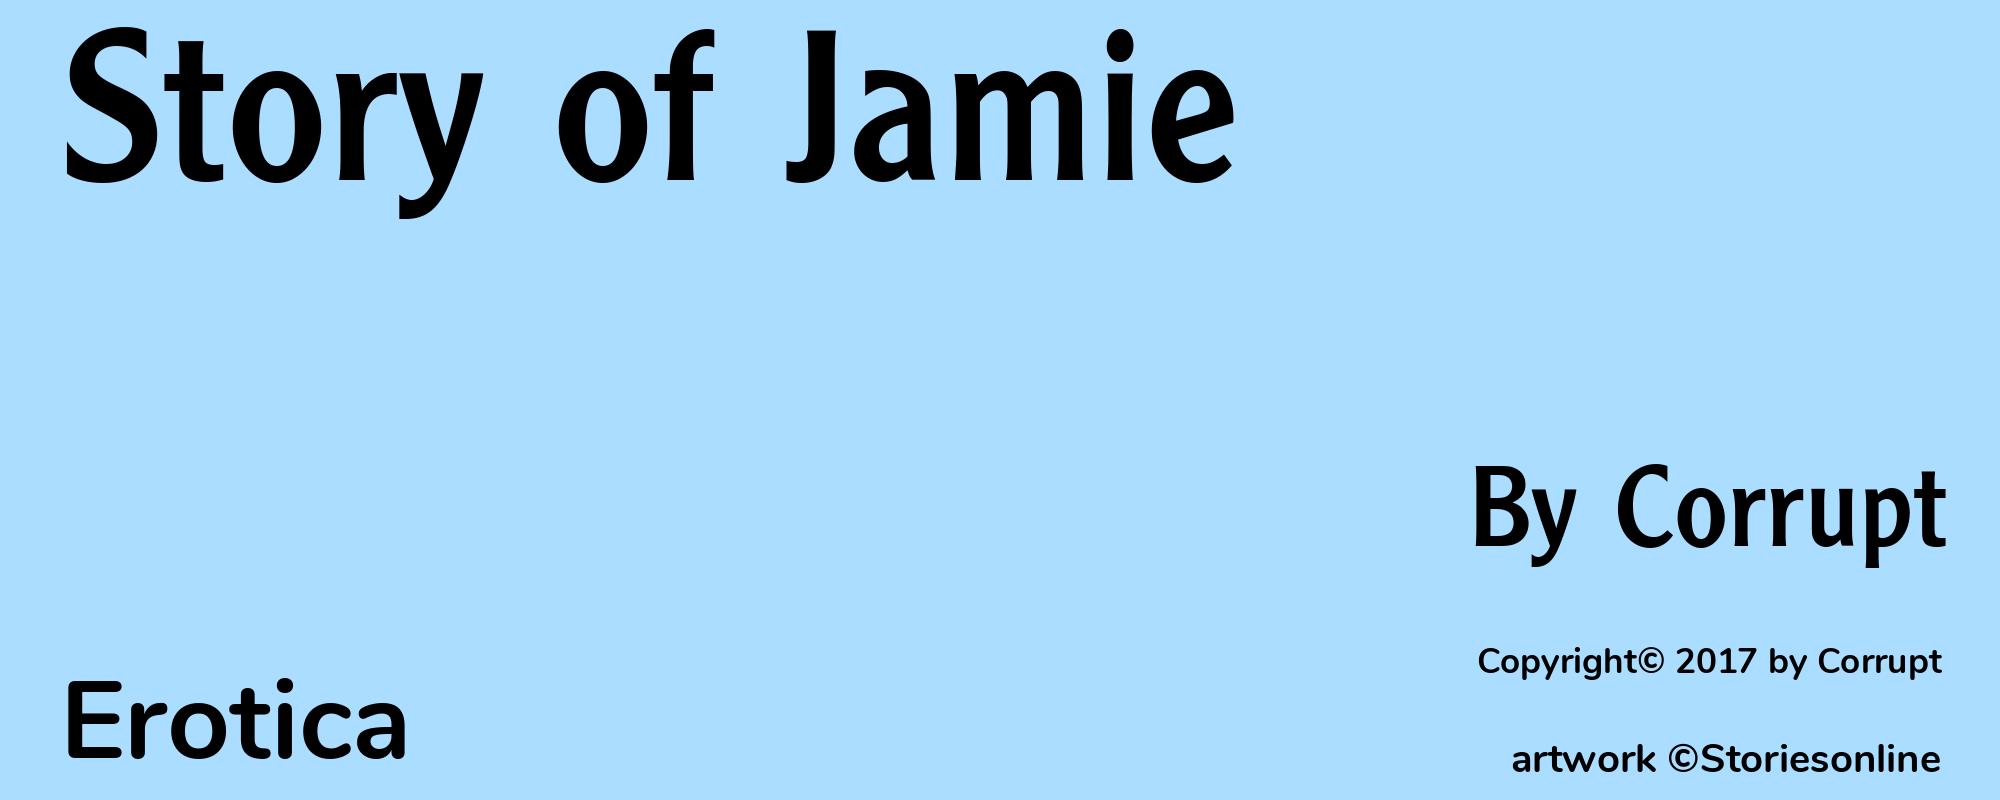 Story of Jamie - Cover